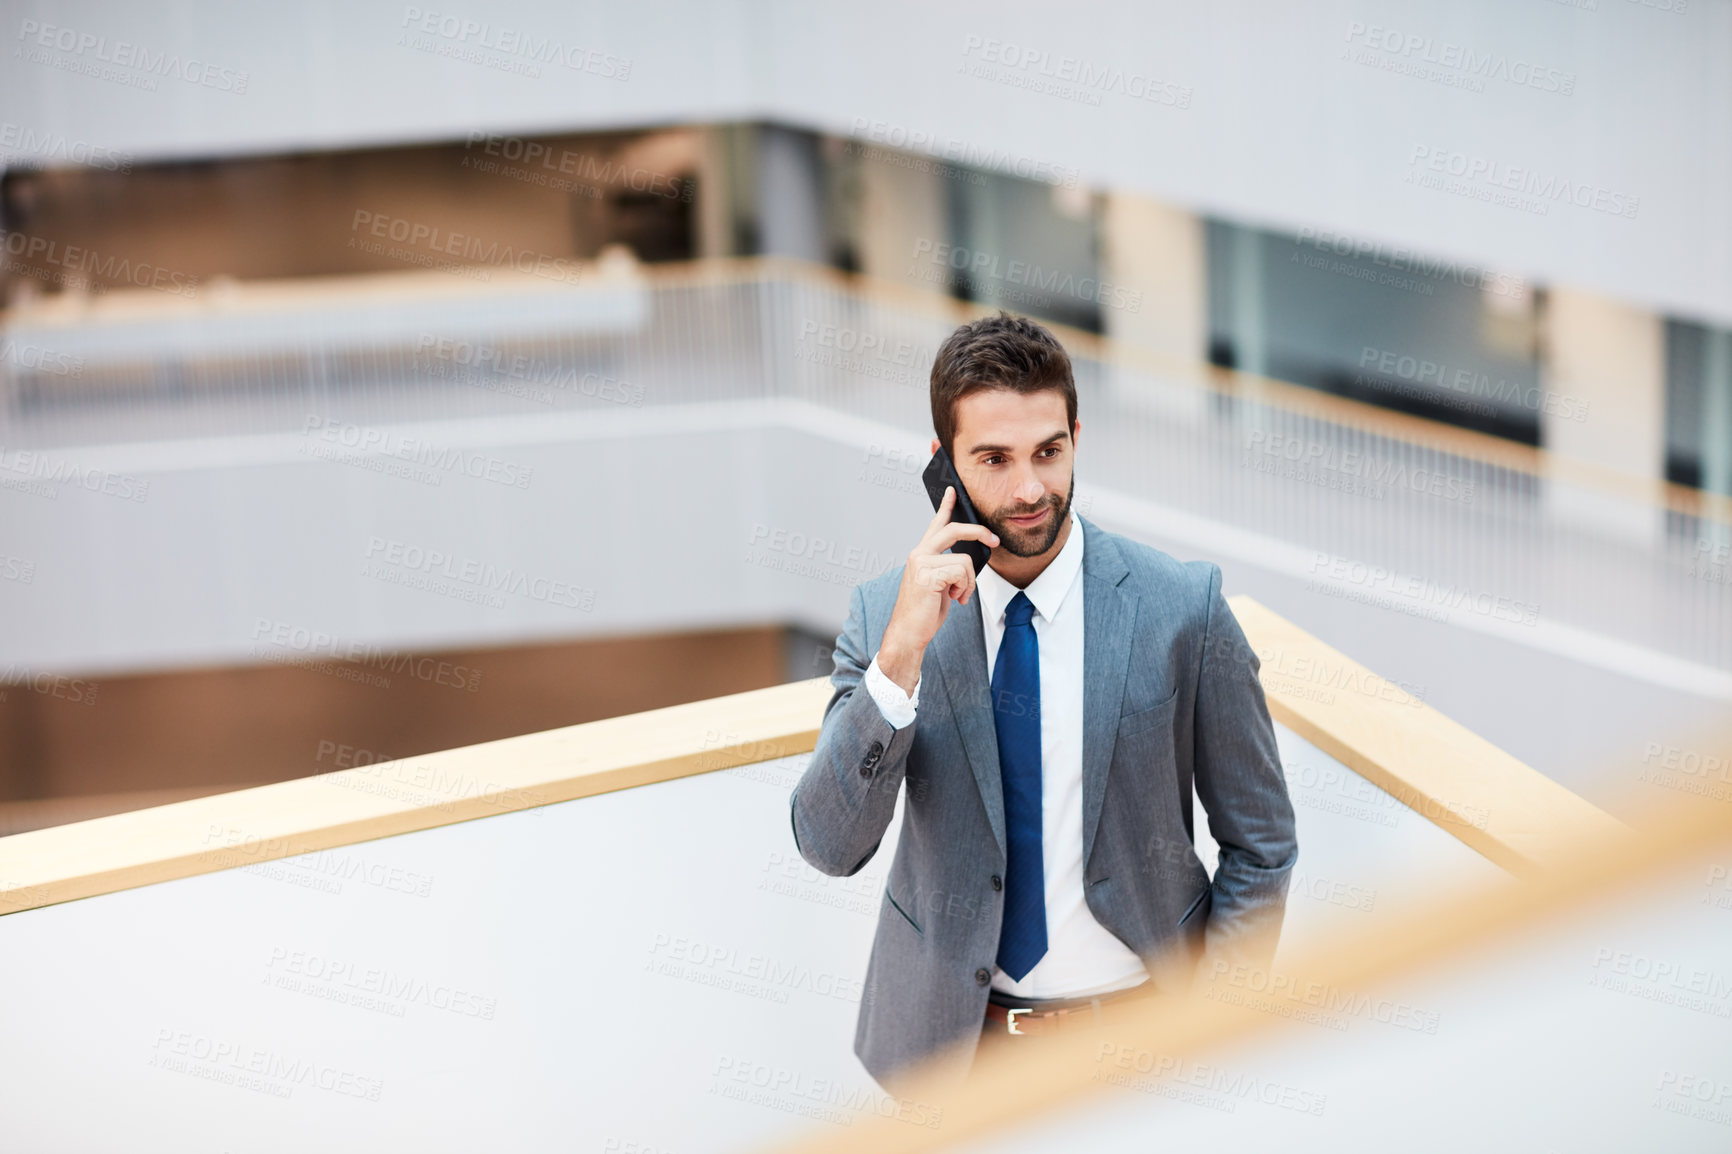 Buy stock photo Shot of a young businessman talking on a cellphone in an office